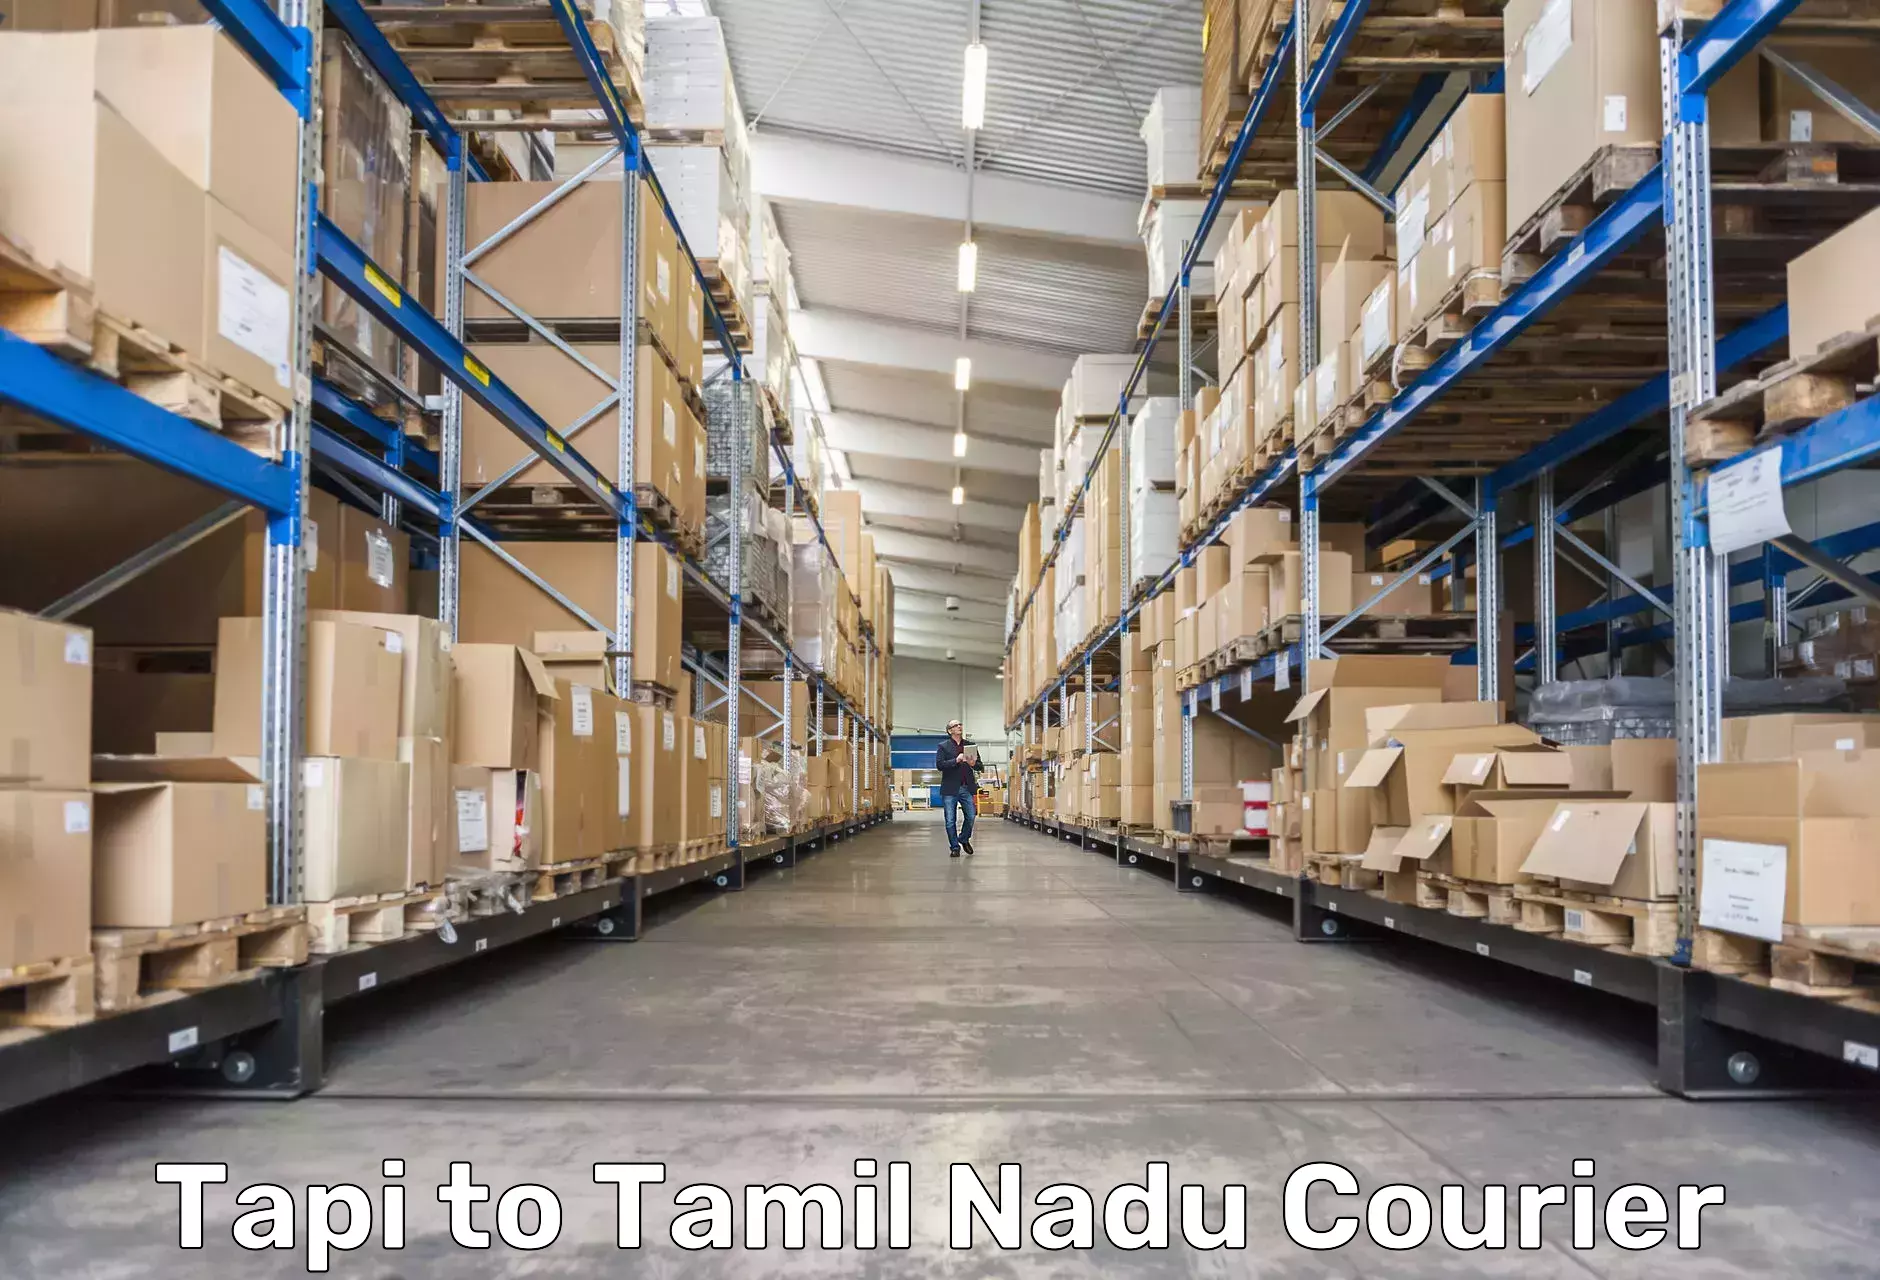 Express delivery network Tapi to Tamil Nadu